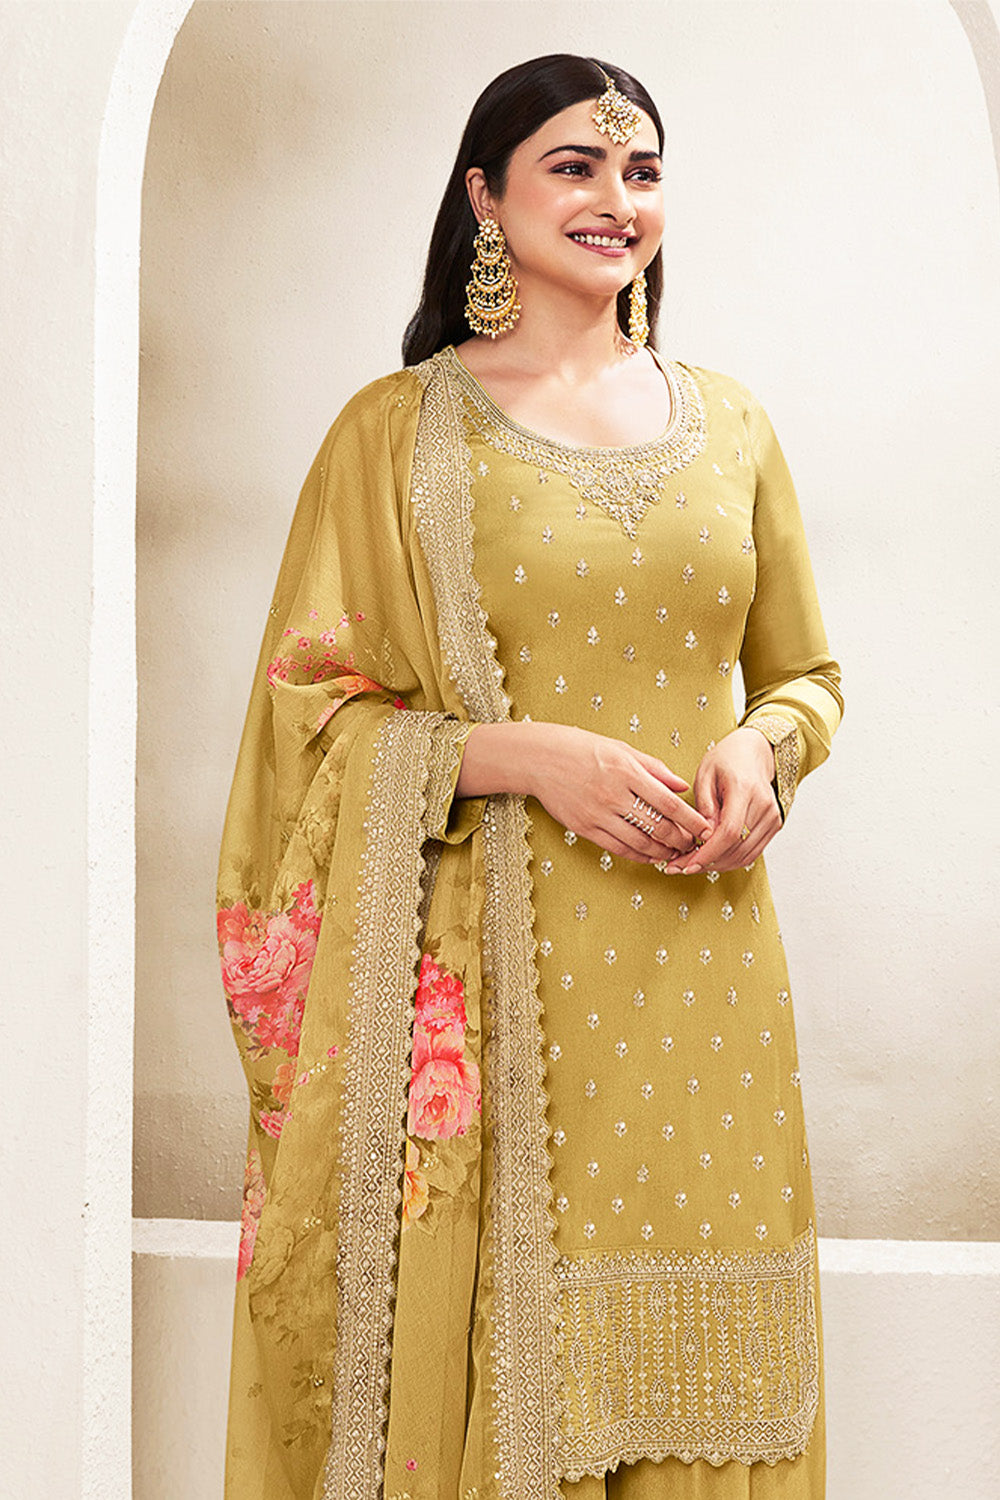 Olive Green Color Georgette Embroidered Unstitched Suit Material With Palazzo